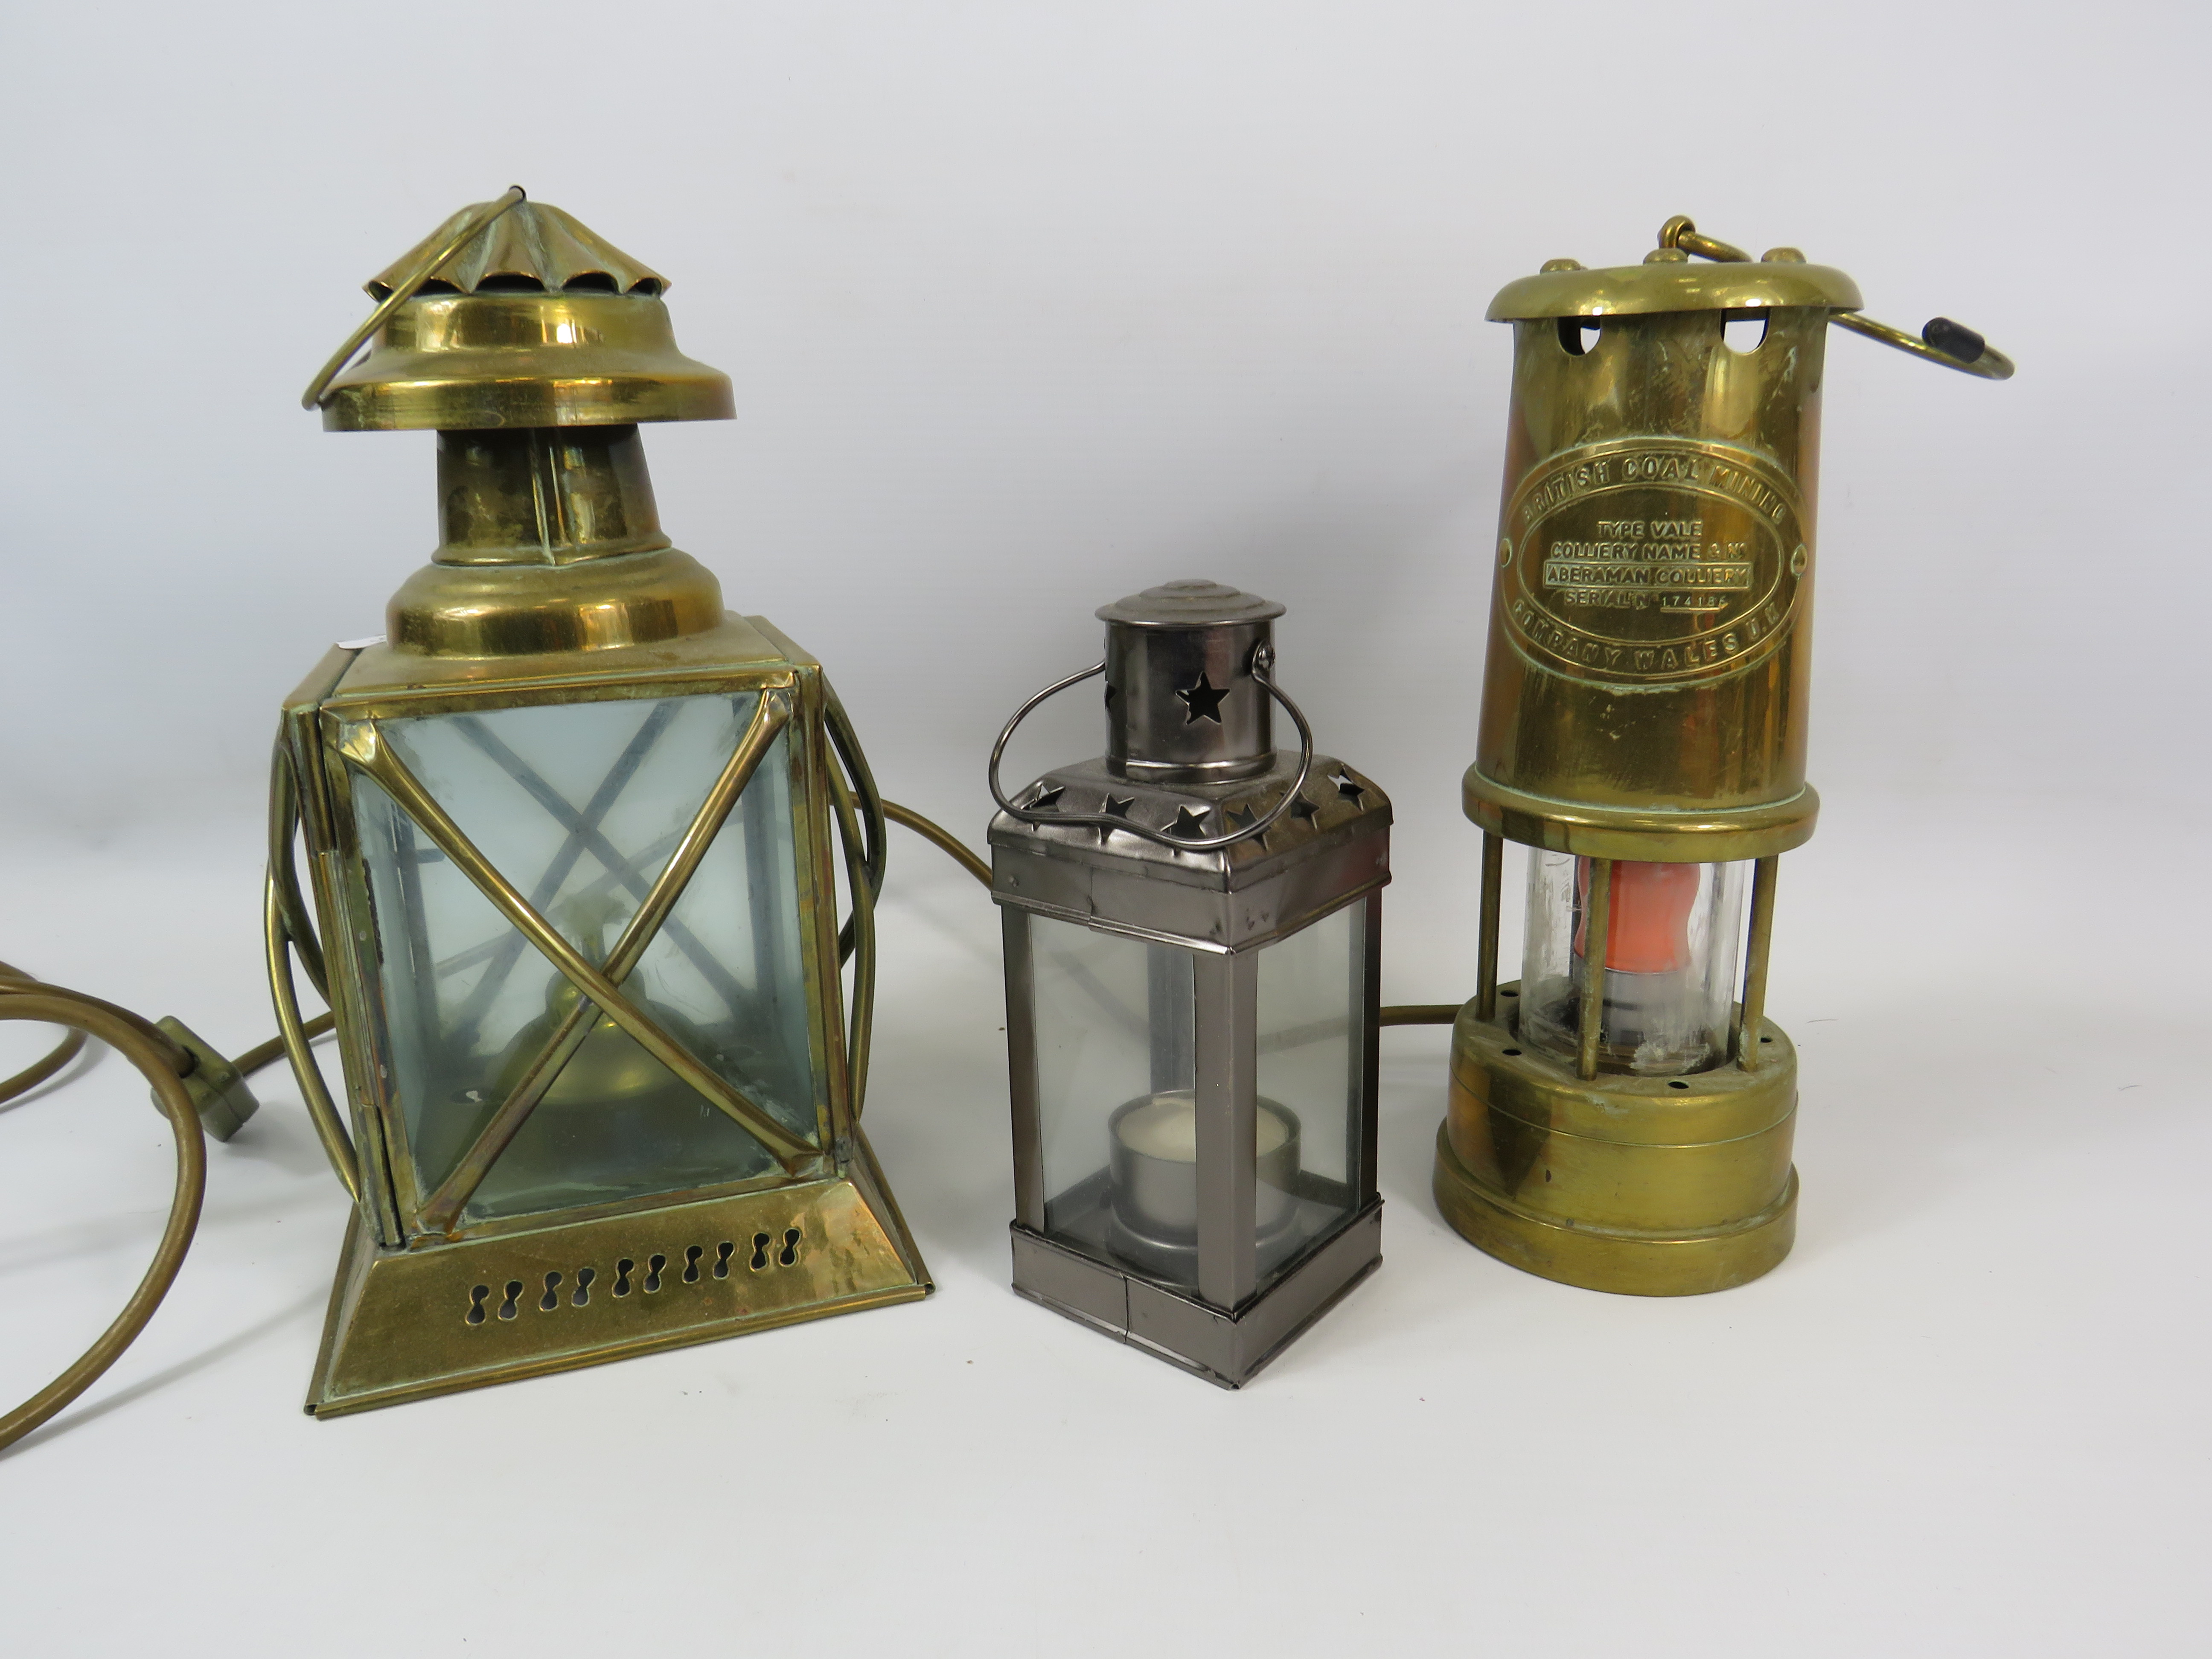 British Coal Mining Type Vale converted to electric lamp, a brass storm lantern and a tea light